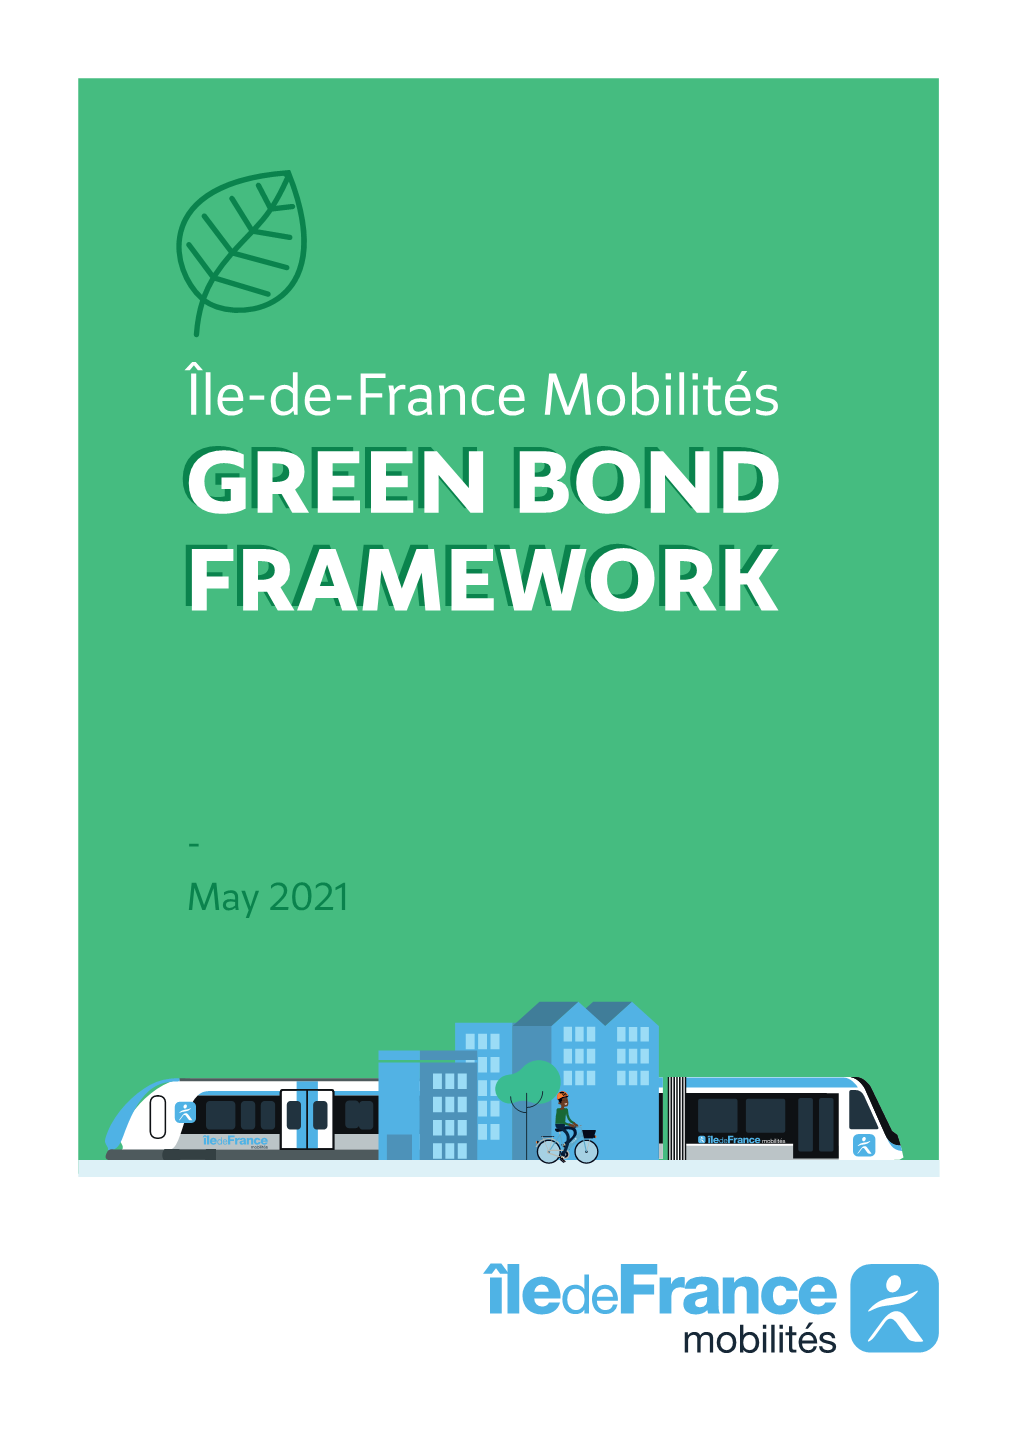 GREEN BOND FRAMEWORK 14 SUMMARY SUMMARY 1 - Use of Proceeds 14 2 - Project Evaluation and Selection Process 16 3 - Management of Proceeds 17 4 - Reporting 17 A